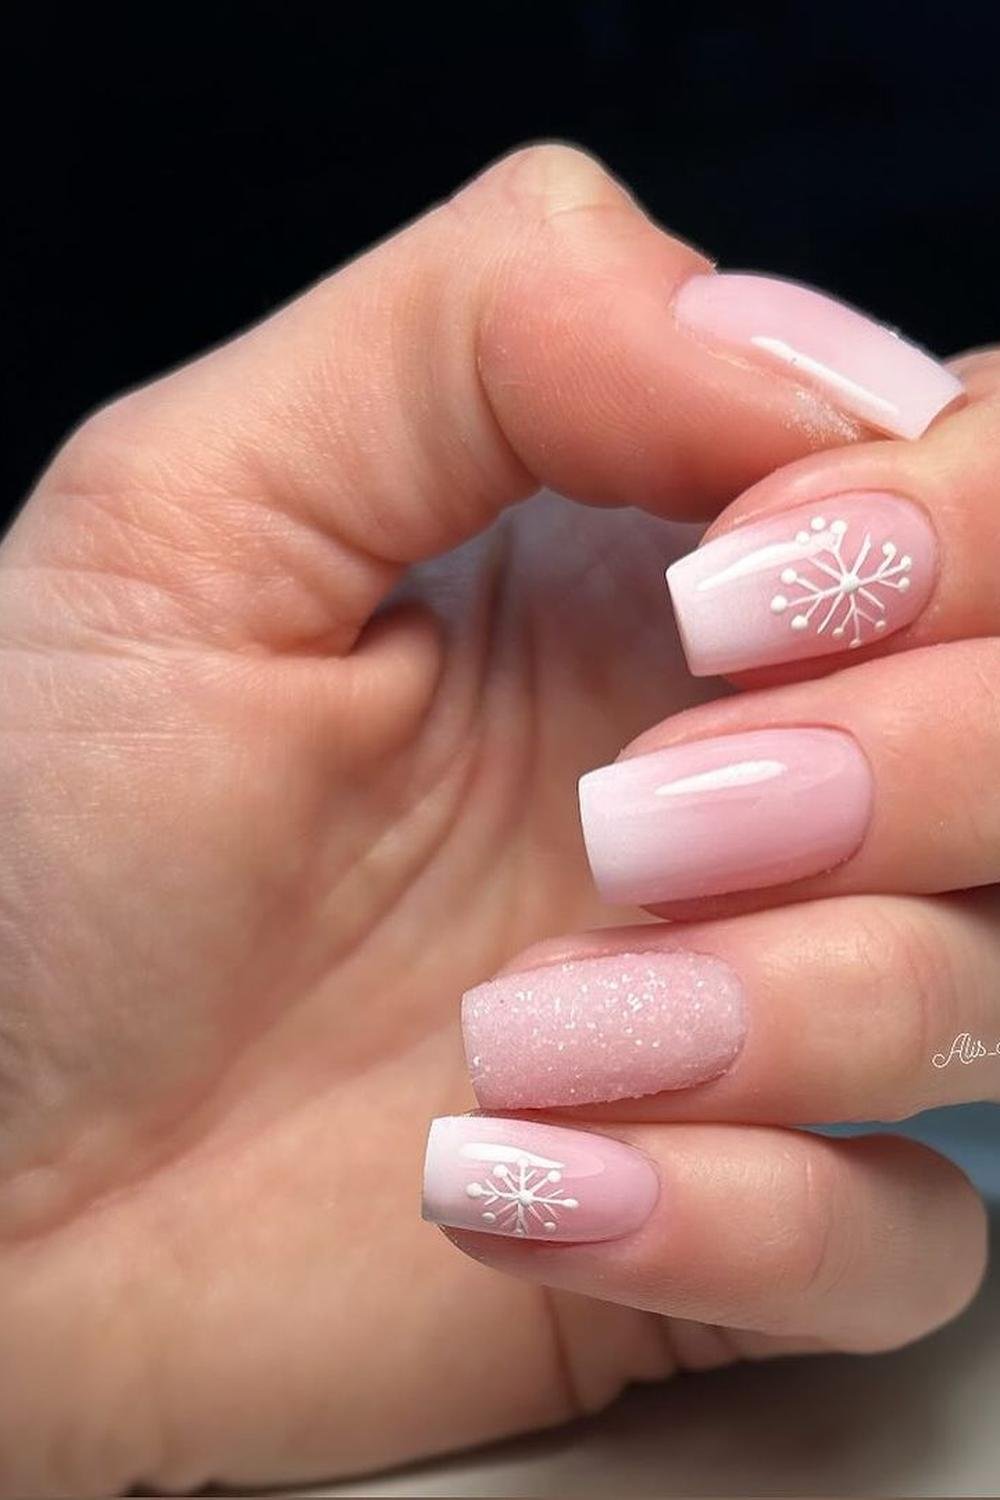 31 - Picture of Baby Boomer Nails